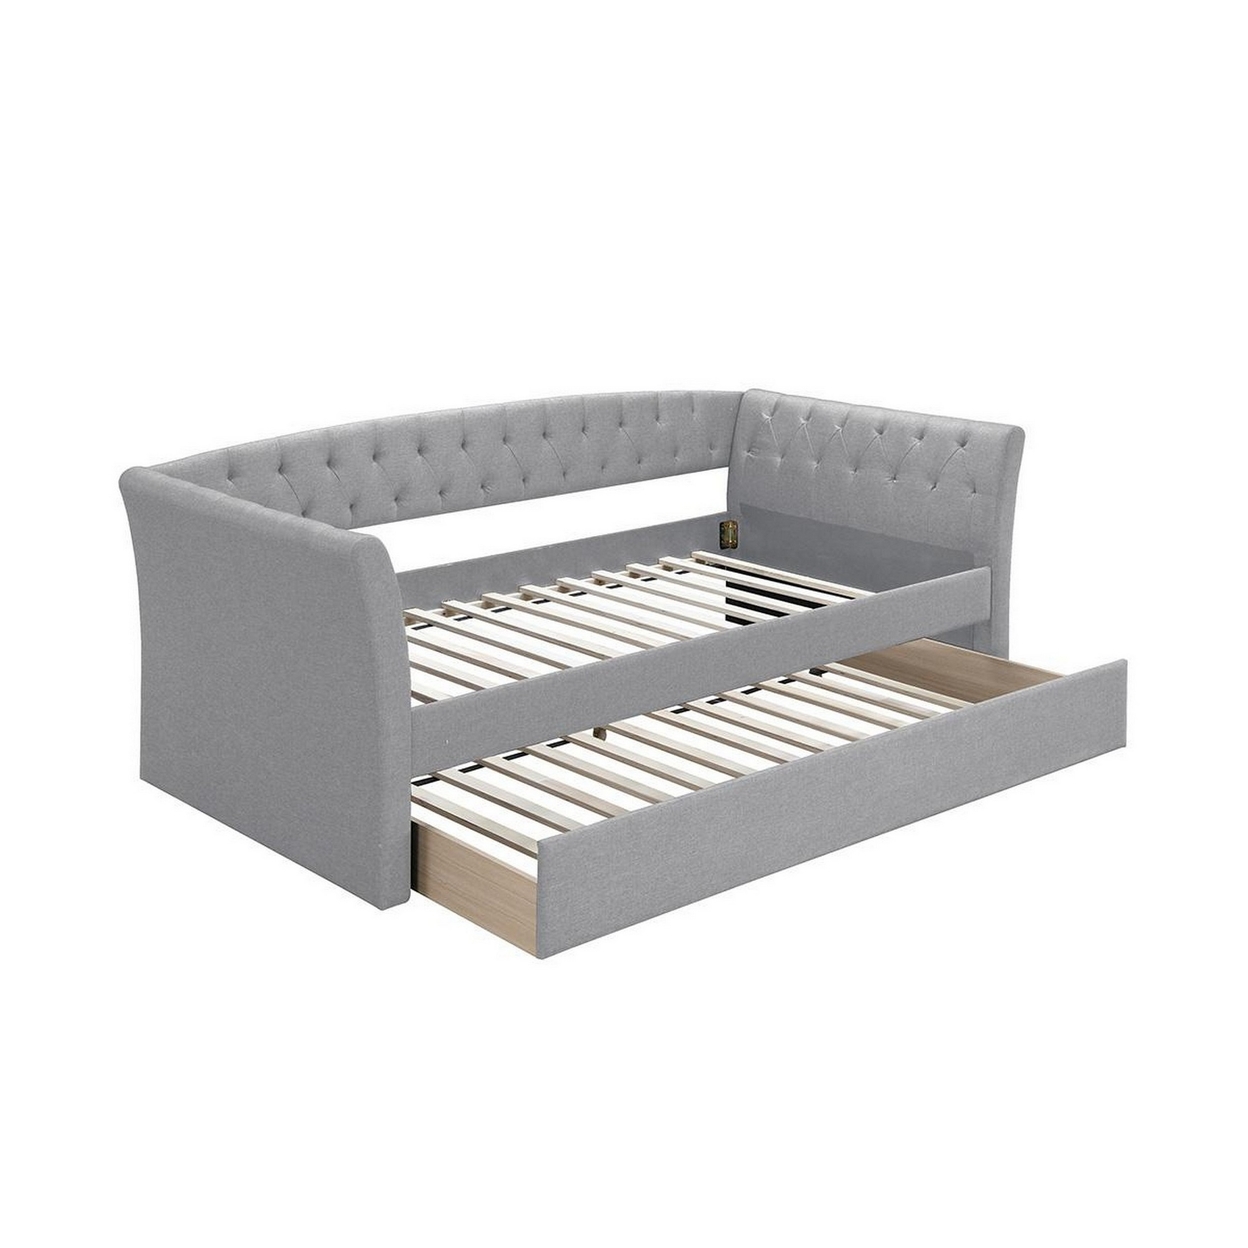 Alma Classic Wood Day Bed With Trundle, Button Tufted, Smooth Gray Burlap- Saltoro Sherpi